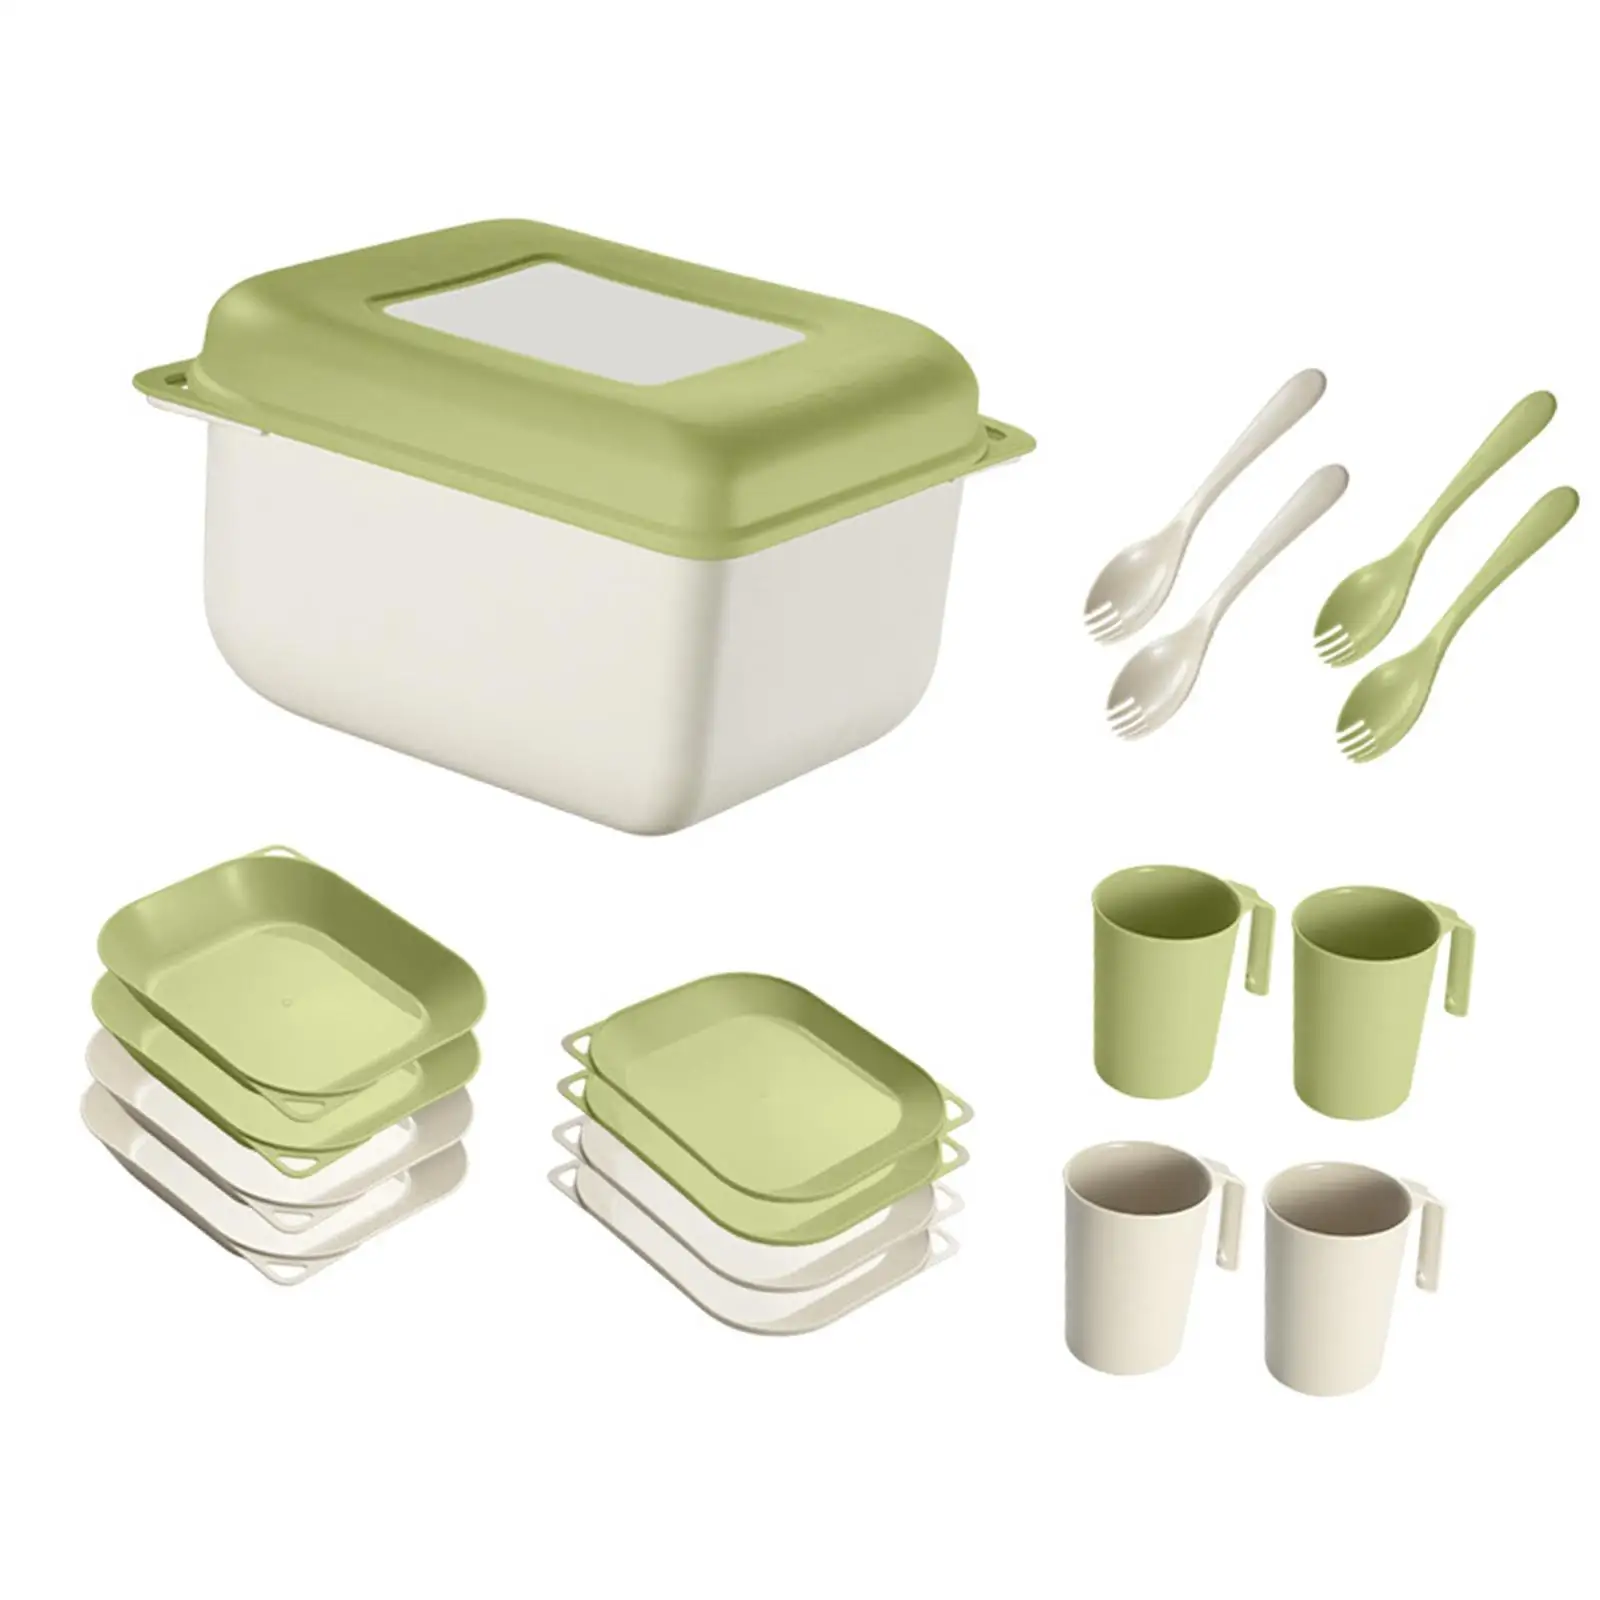 Dinnerware Sets Box Nordic Adults Cutlery Utensils Outdoor Tableware Set Camping Cutlery Set for RV Kitchen Camping Picnic Dorm